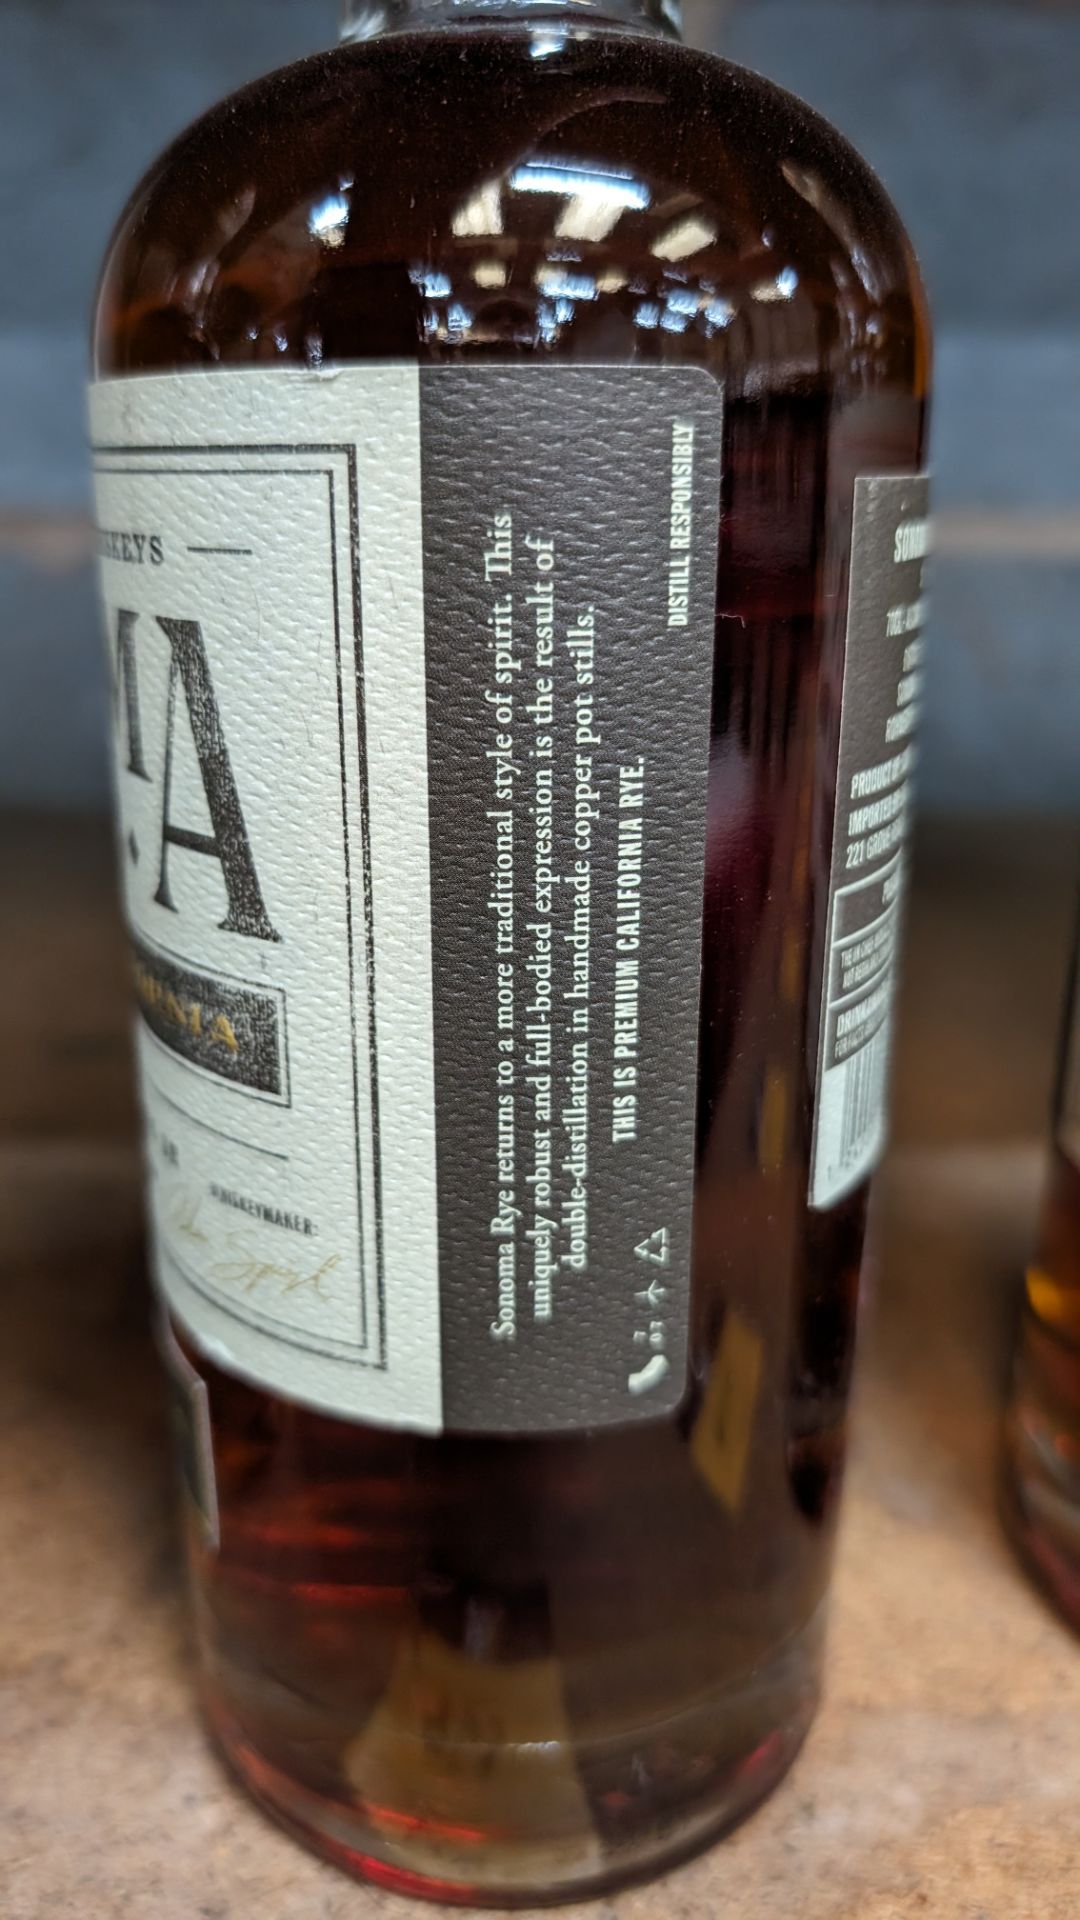 1 off 700ml bottle of Sonoma Rye Whiskey. 46.5% alc/vol (93 proof). Distilled and bottled in Sonom - Image 5 of 5